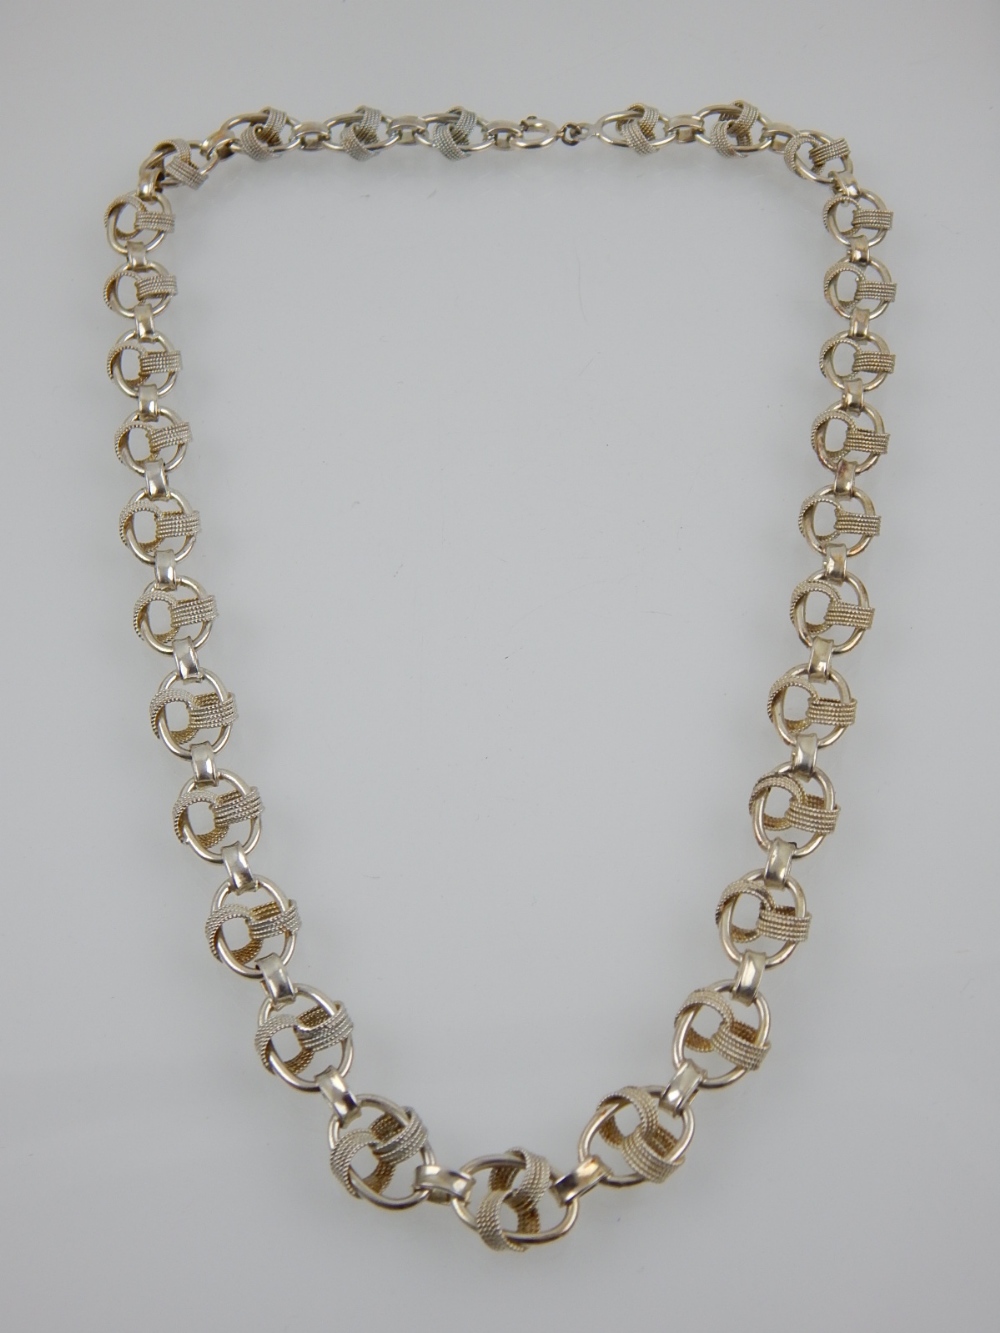 A silver necklace of knotted link design.